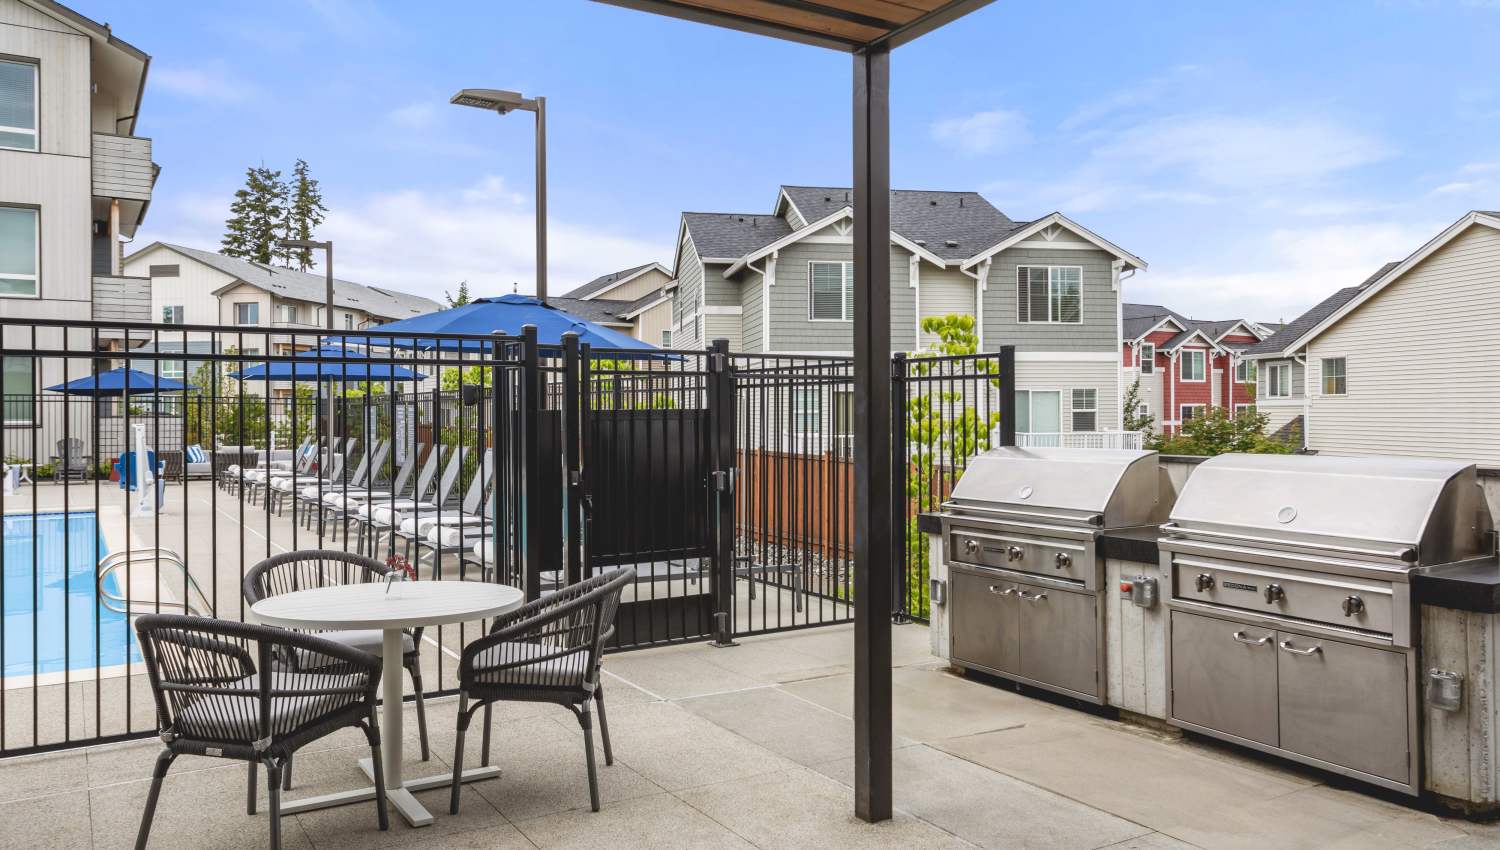 Picnic area and grills at Helm in Everett, Washington